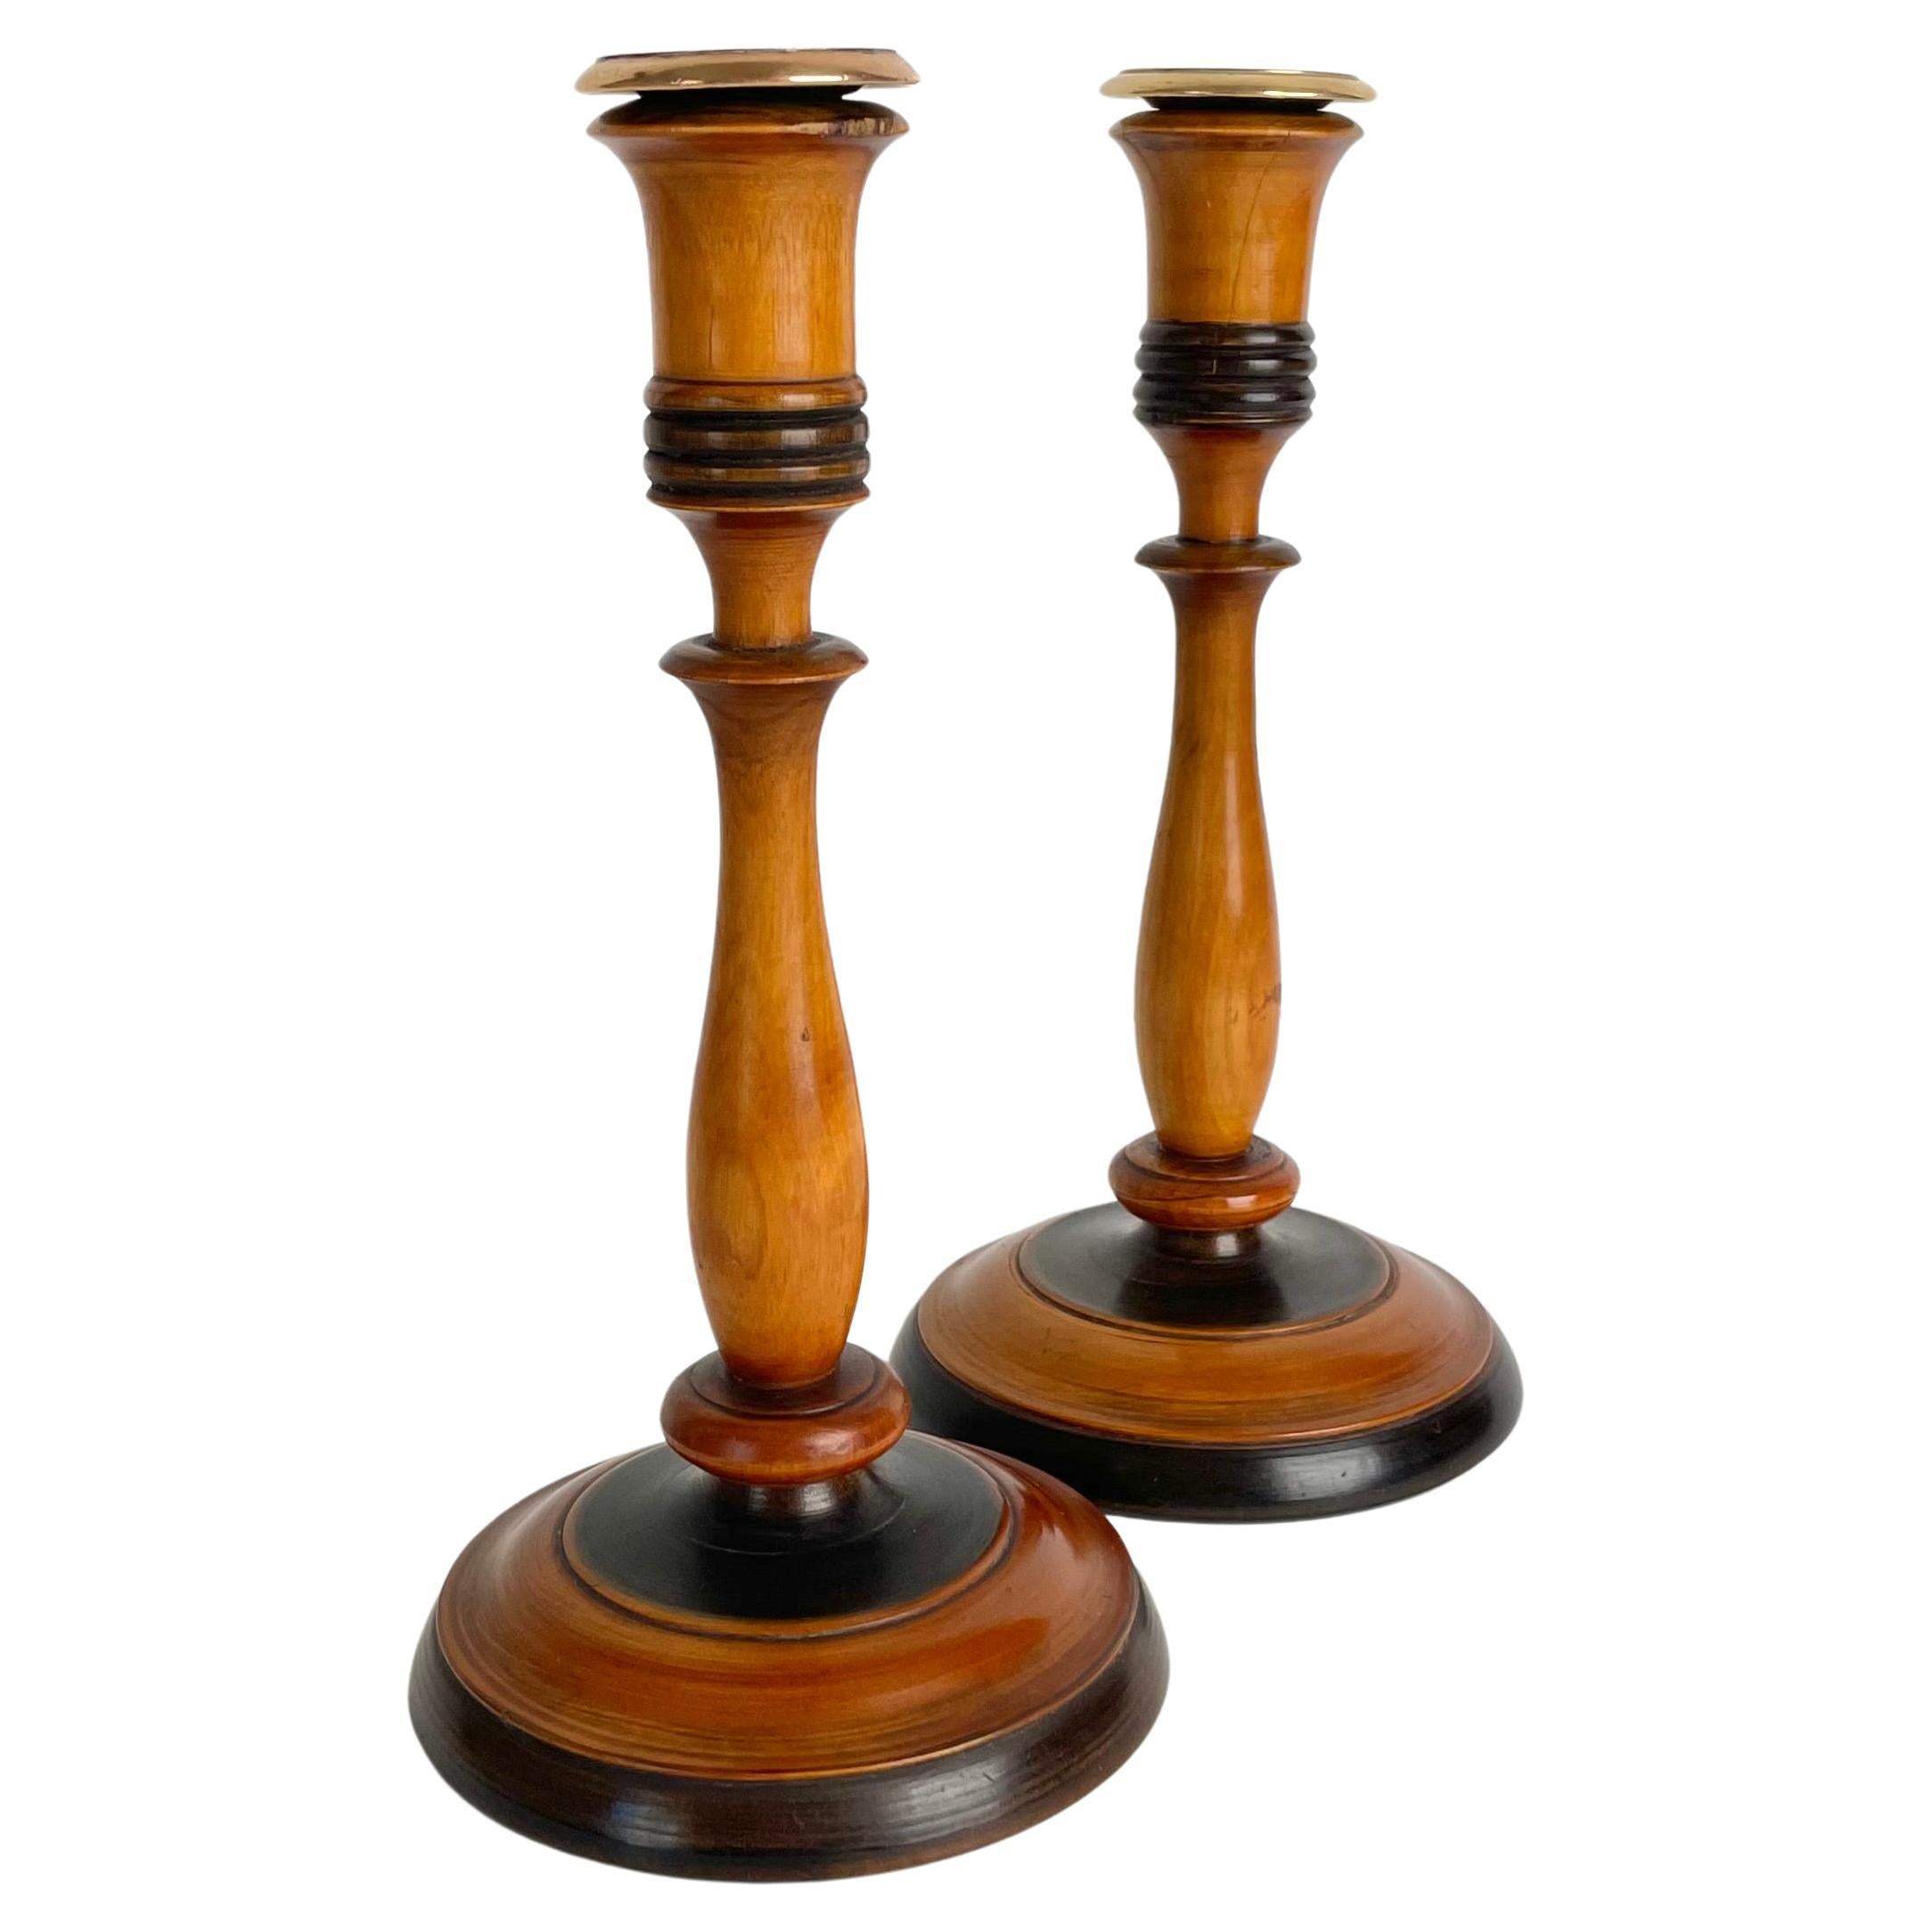 Pair of Birch Candlesticks in Swedish Karl-Johan from the 1820s-1830s